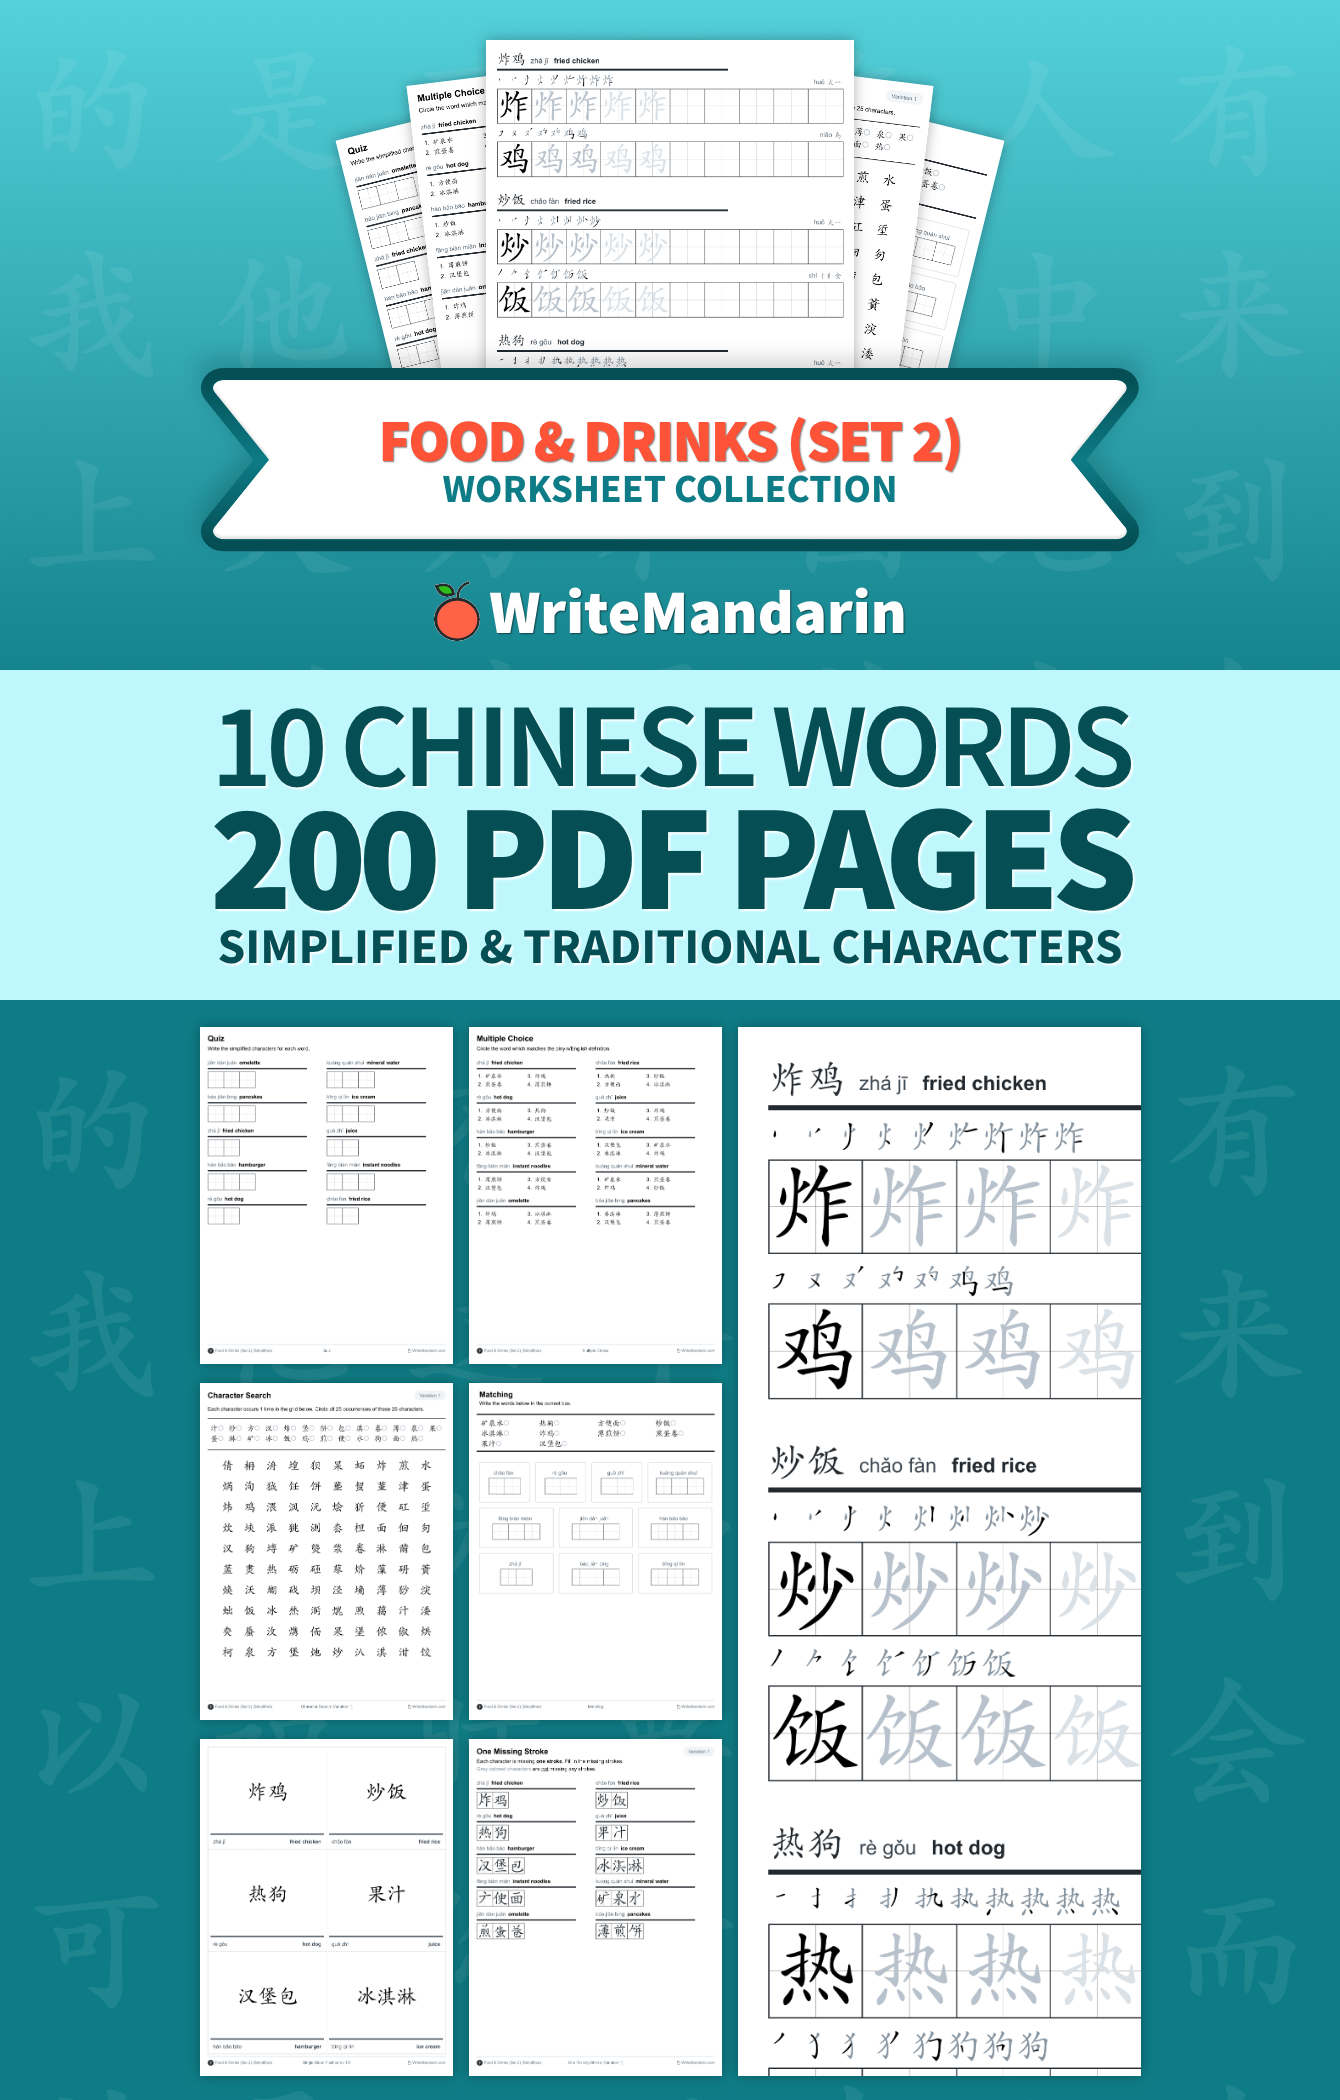 Preview image of Food & Drinks (Set 2) worksheet collection